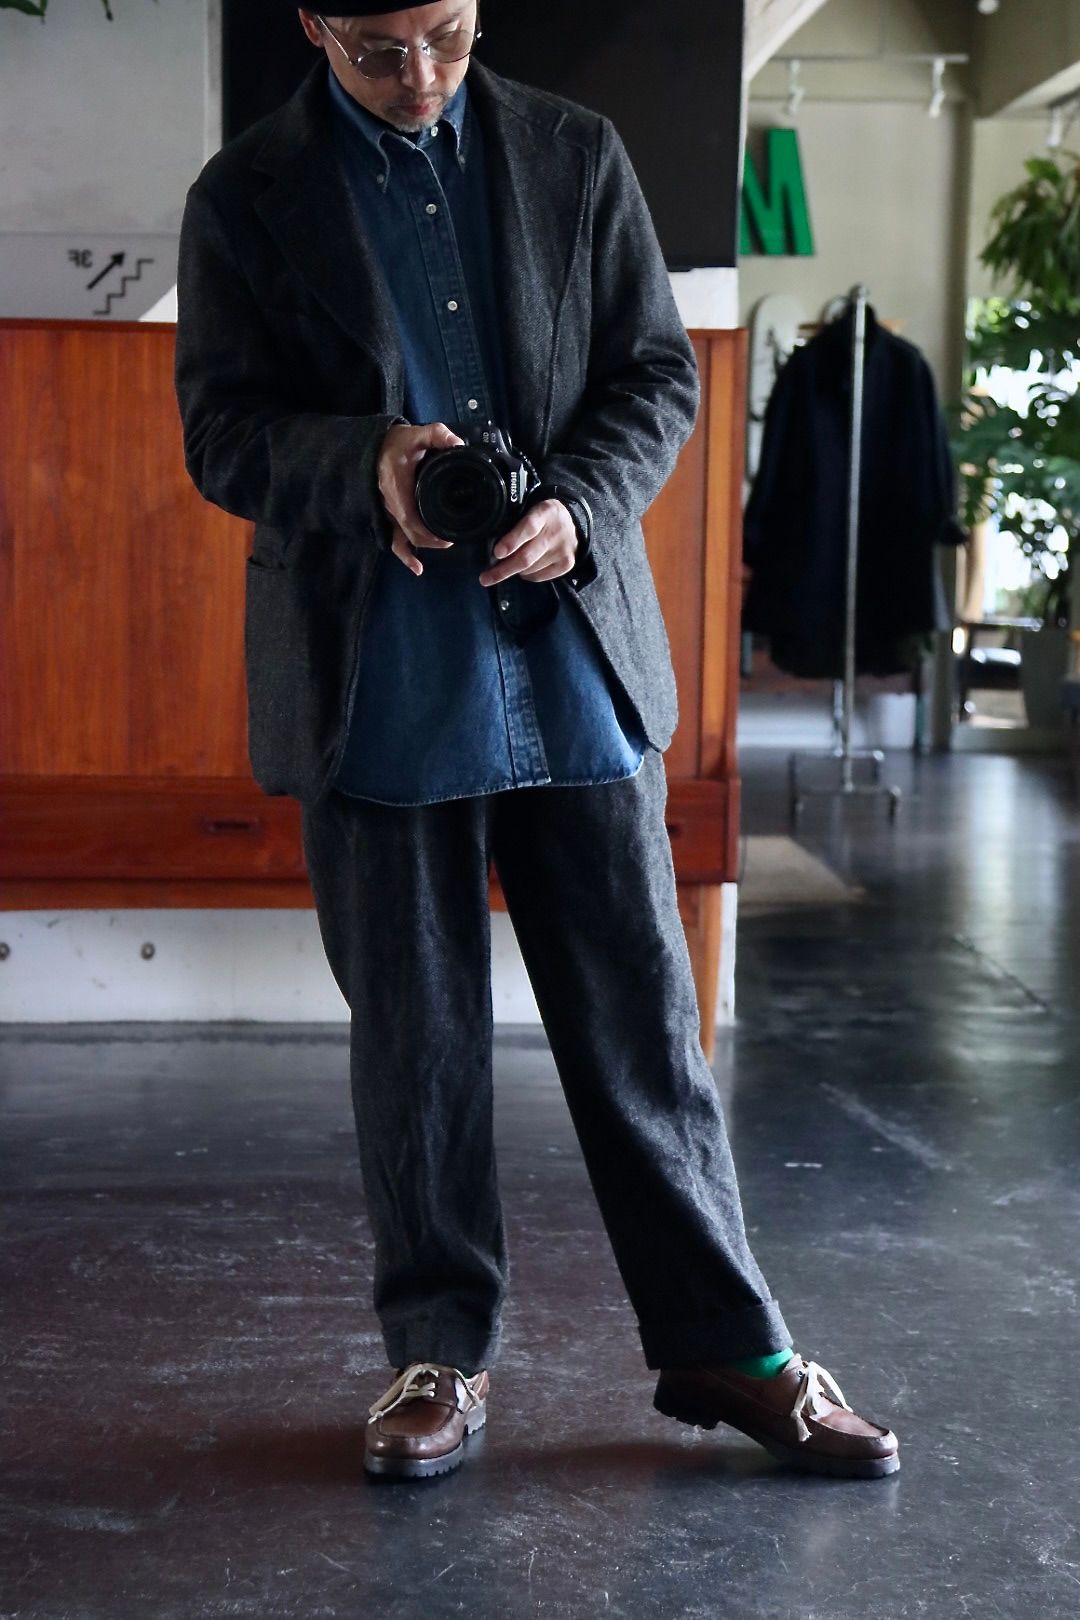 A.PRESSE アプレッセ Tweed Tailored Jacket1回着用のみの美品です